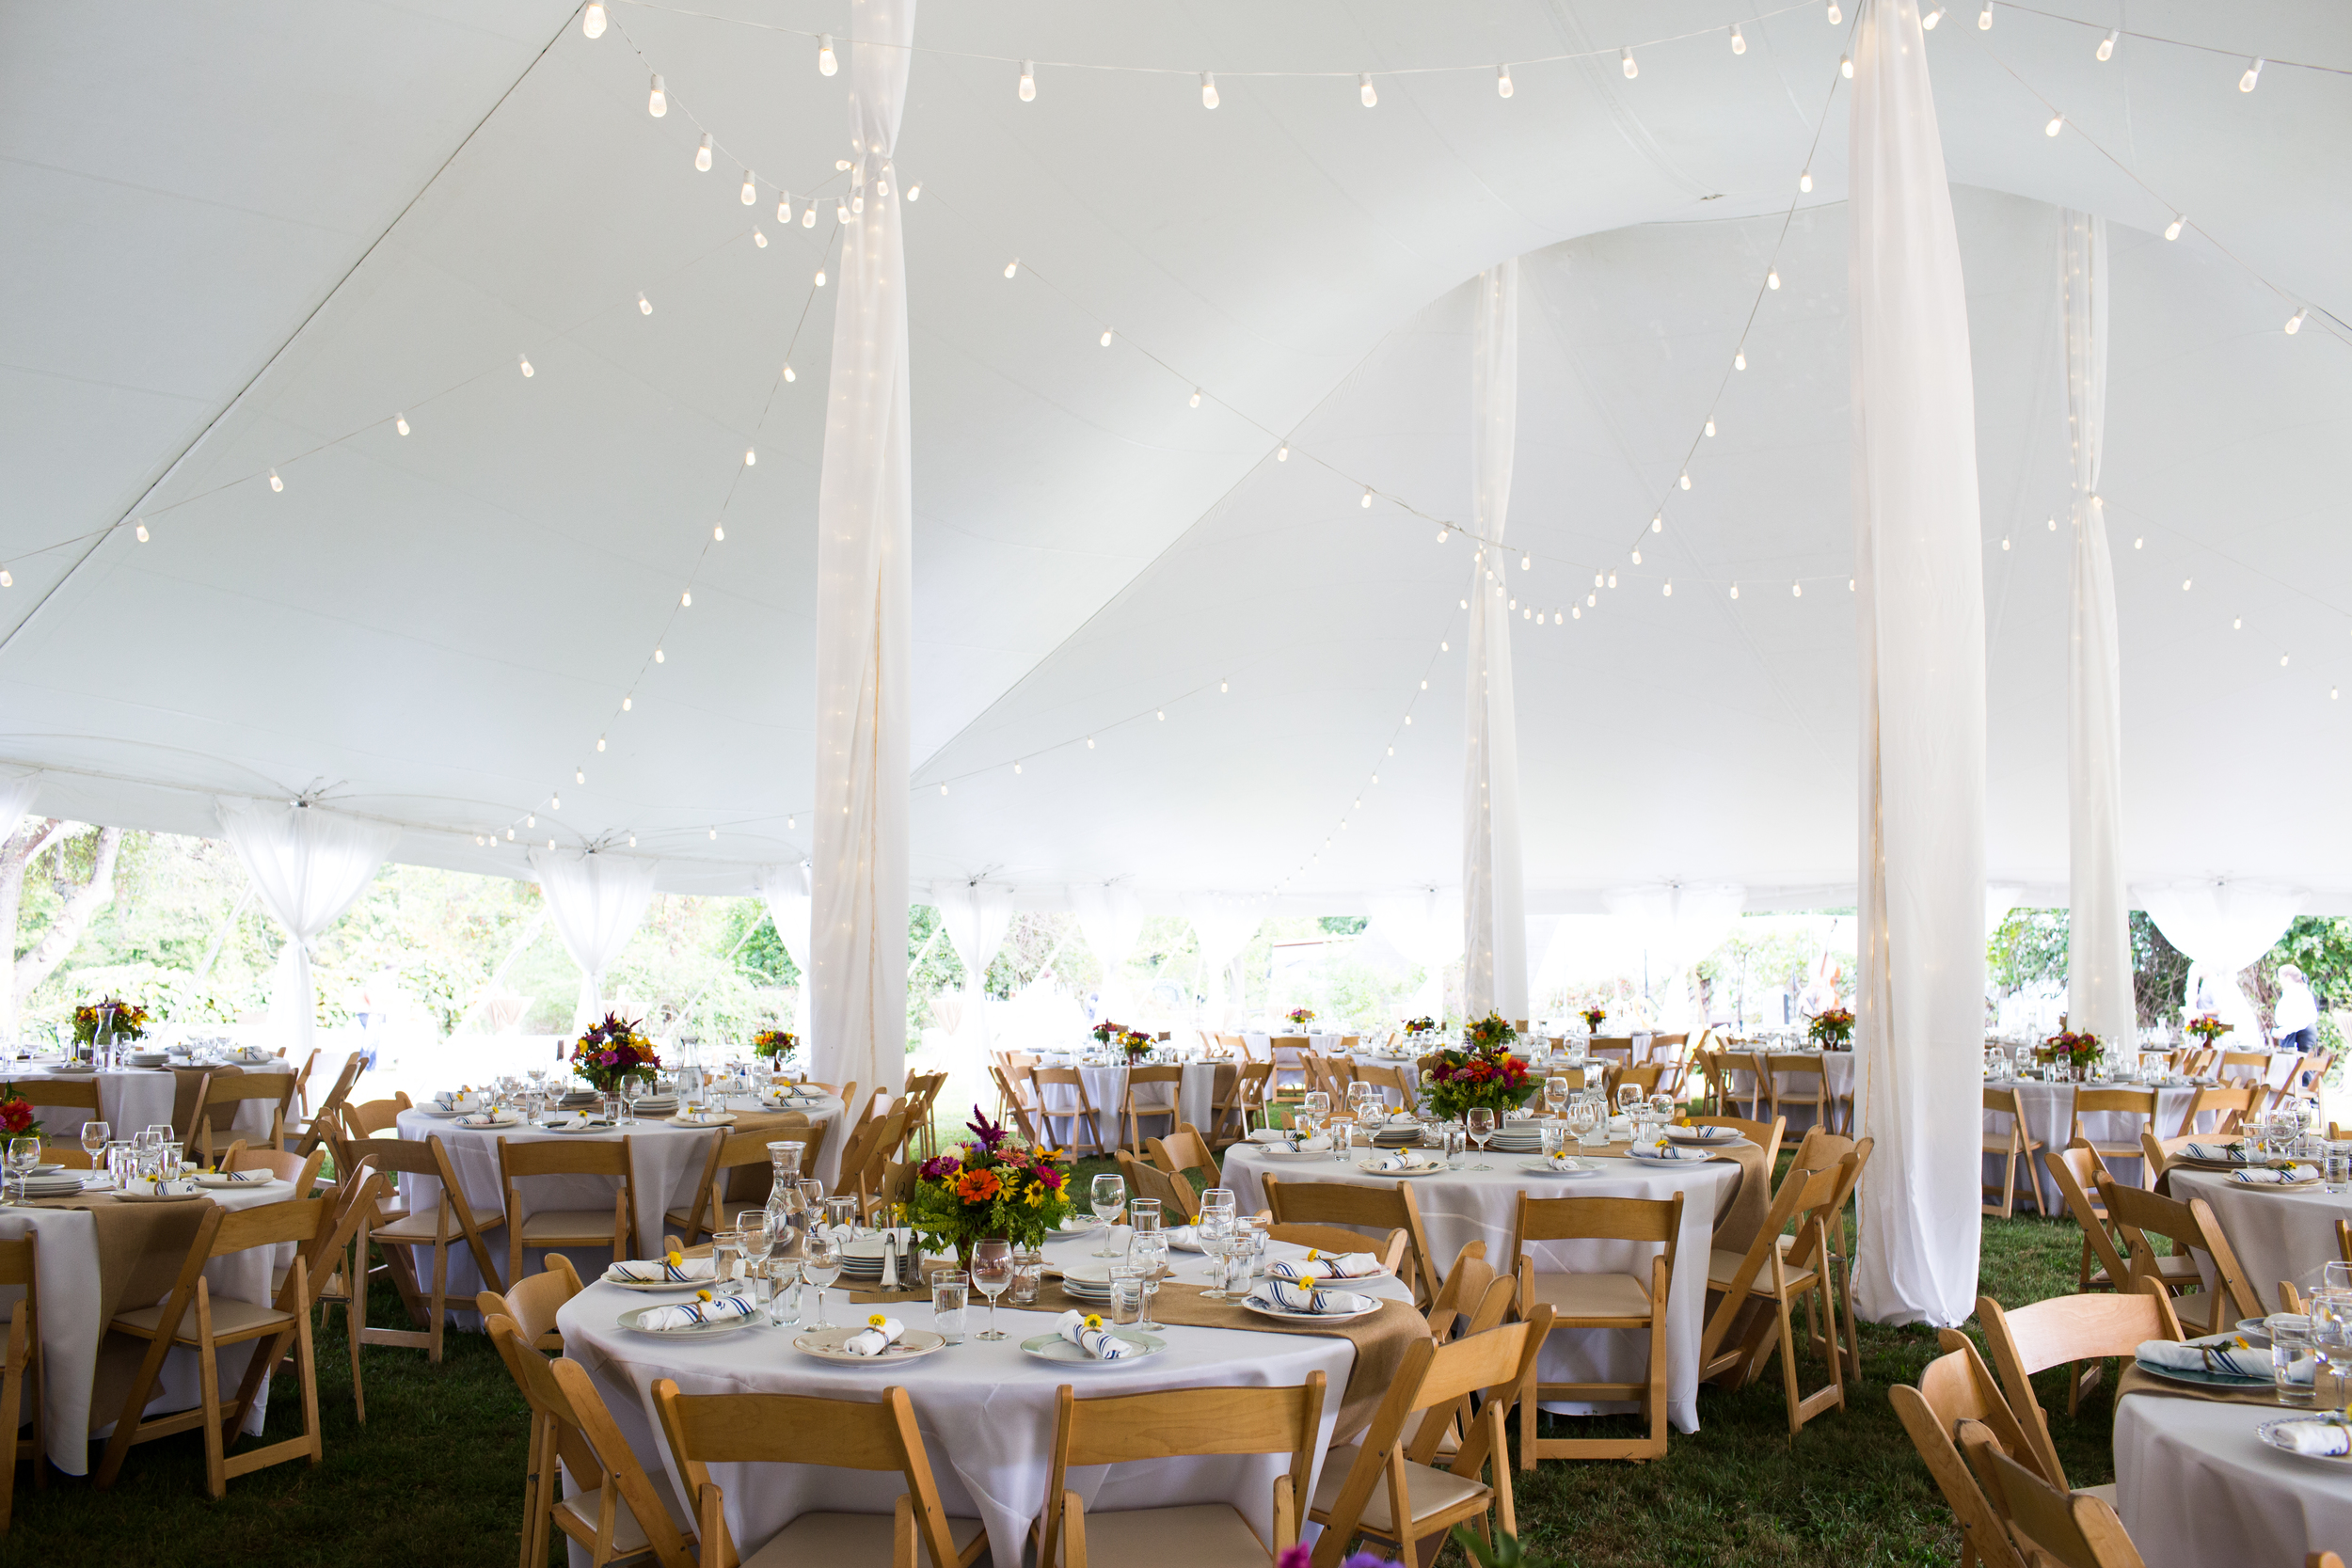  The Bowling Green can support tents and tables for any large-scale dining events, rain or shine. 